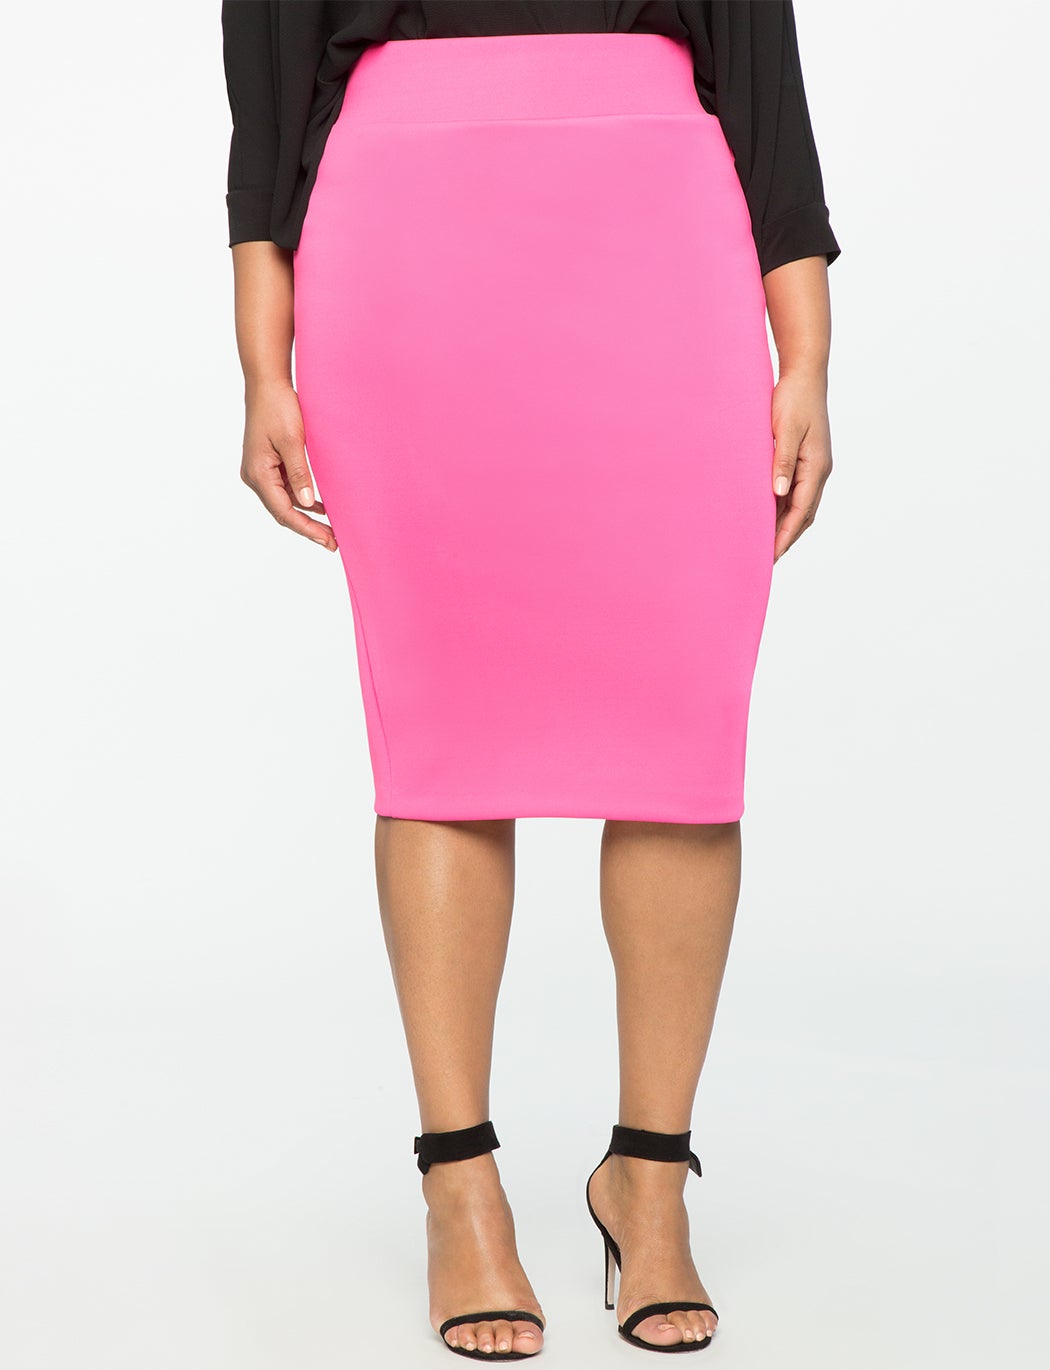 17 Pieces Every Curvy Girl Absolutely Needs From Eloquii's Clearance Sale
